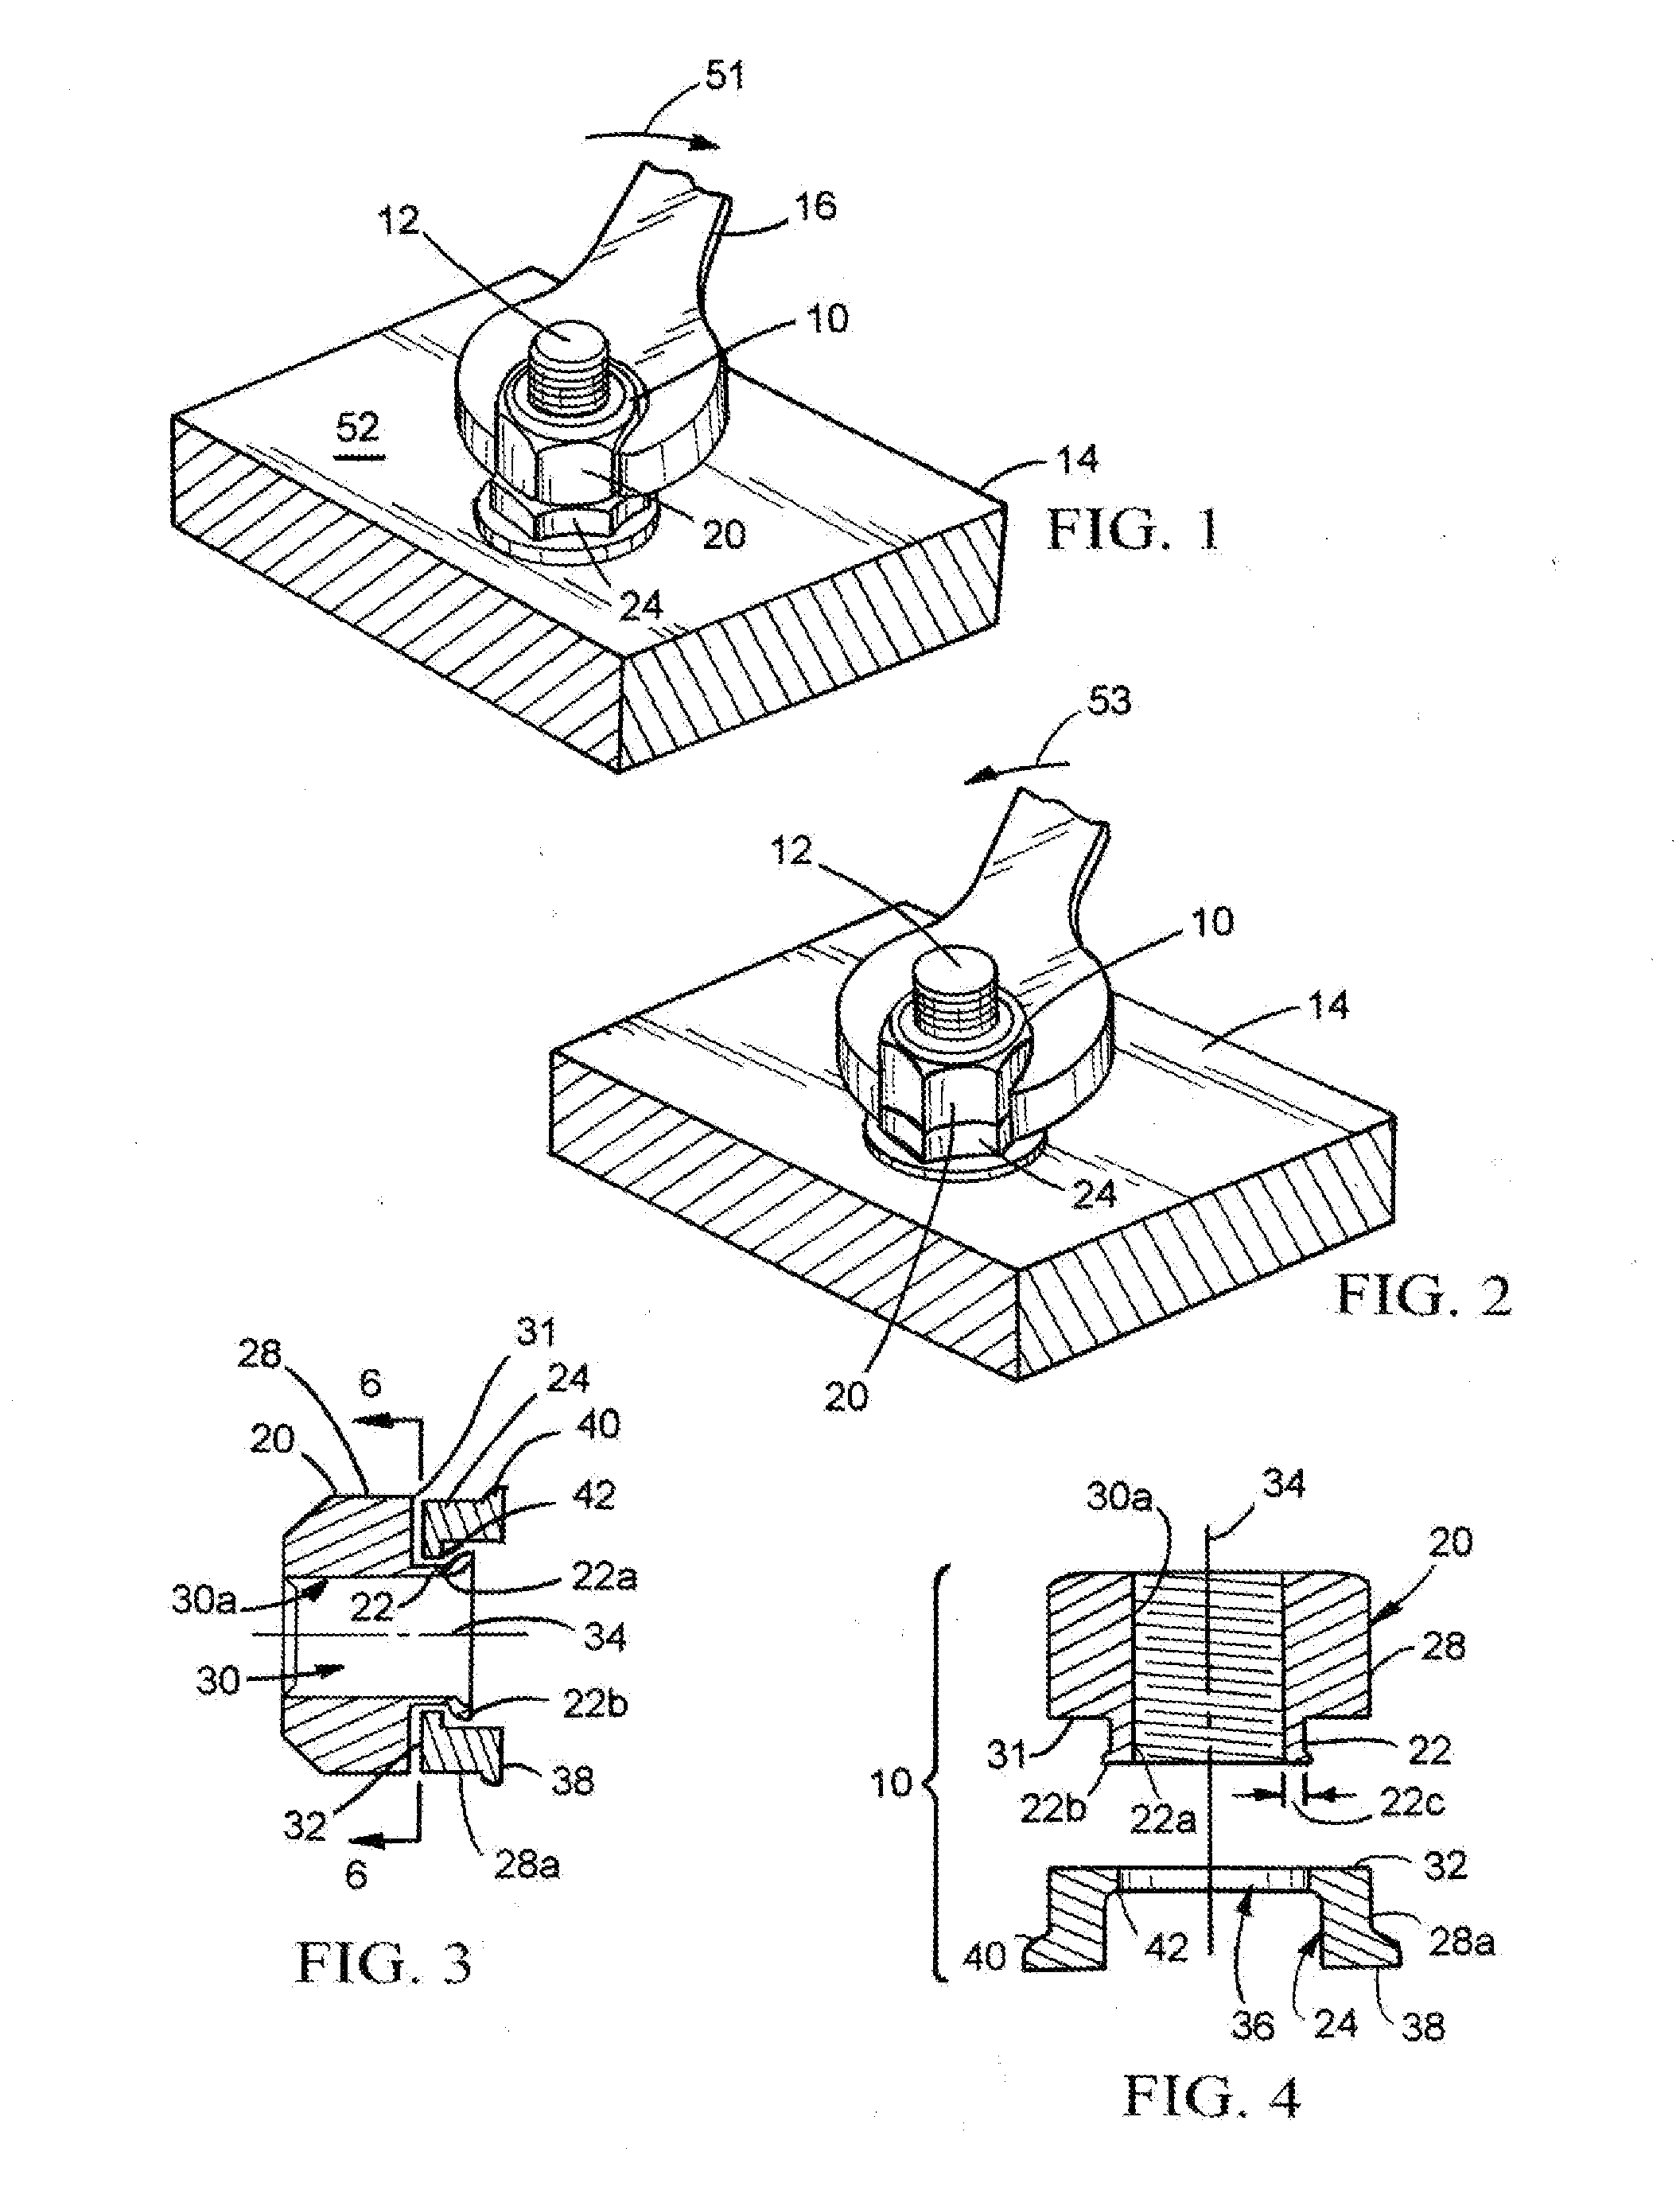 Anti-back-out fastener for applications under vibration